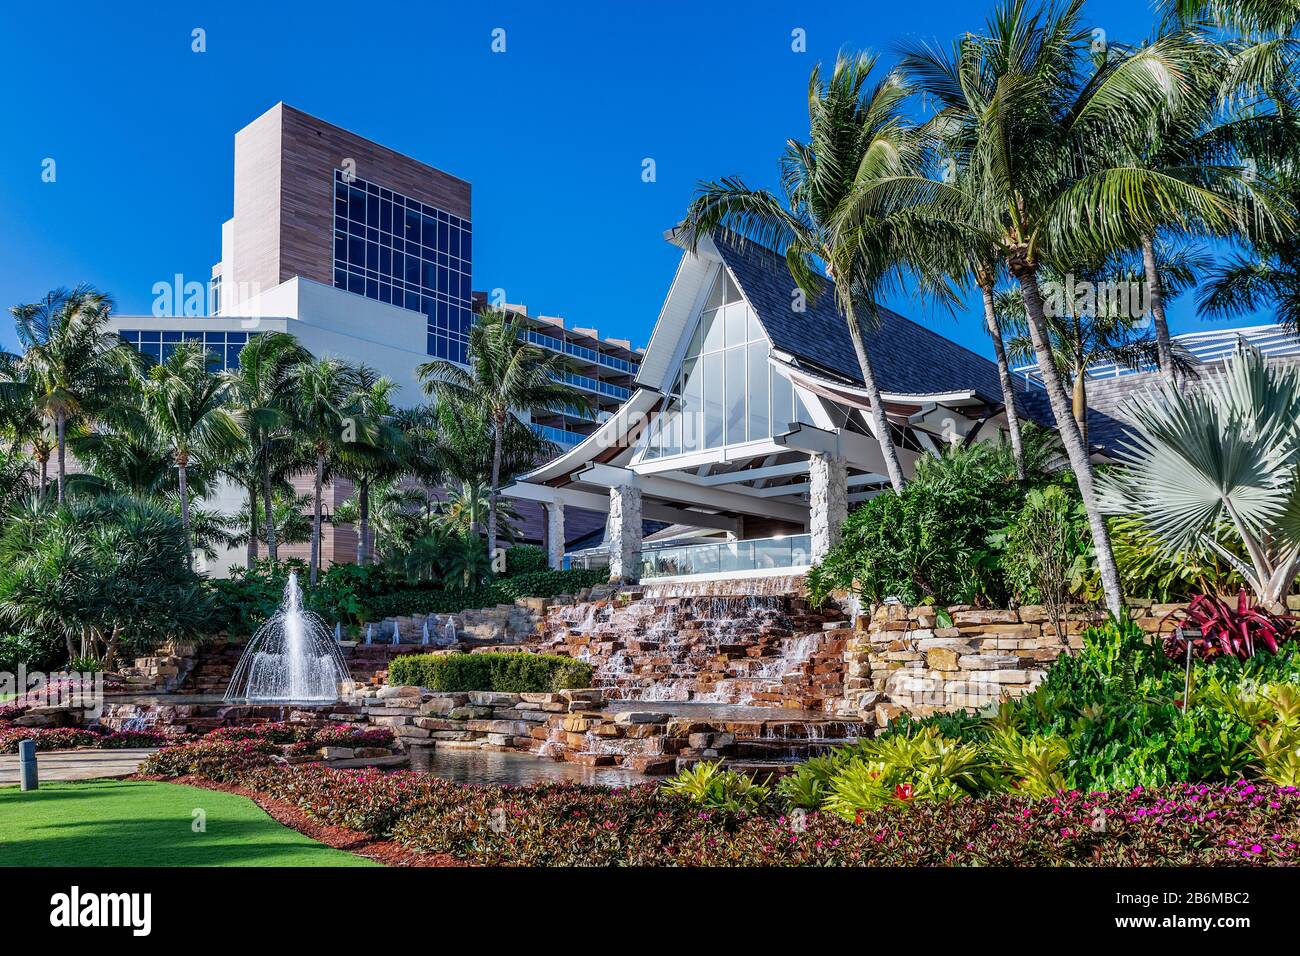 Exterior of the Hilton Resort and Spa Hotel on Marco Island. Stock Photo